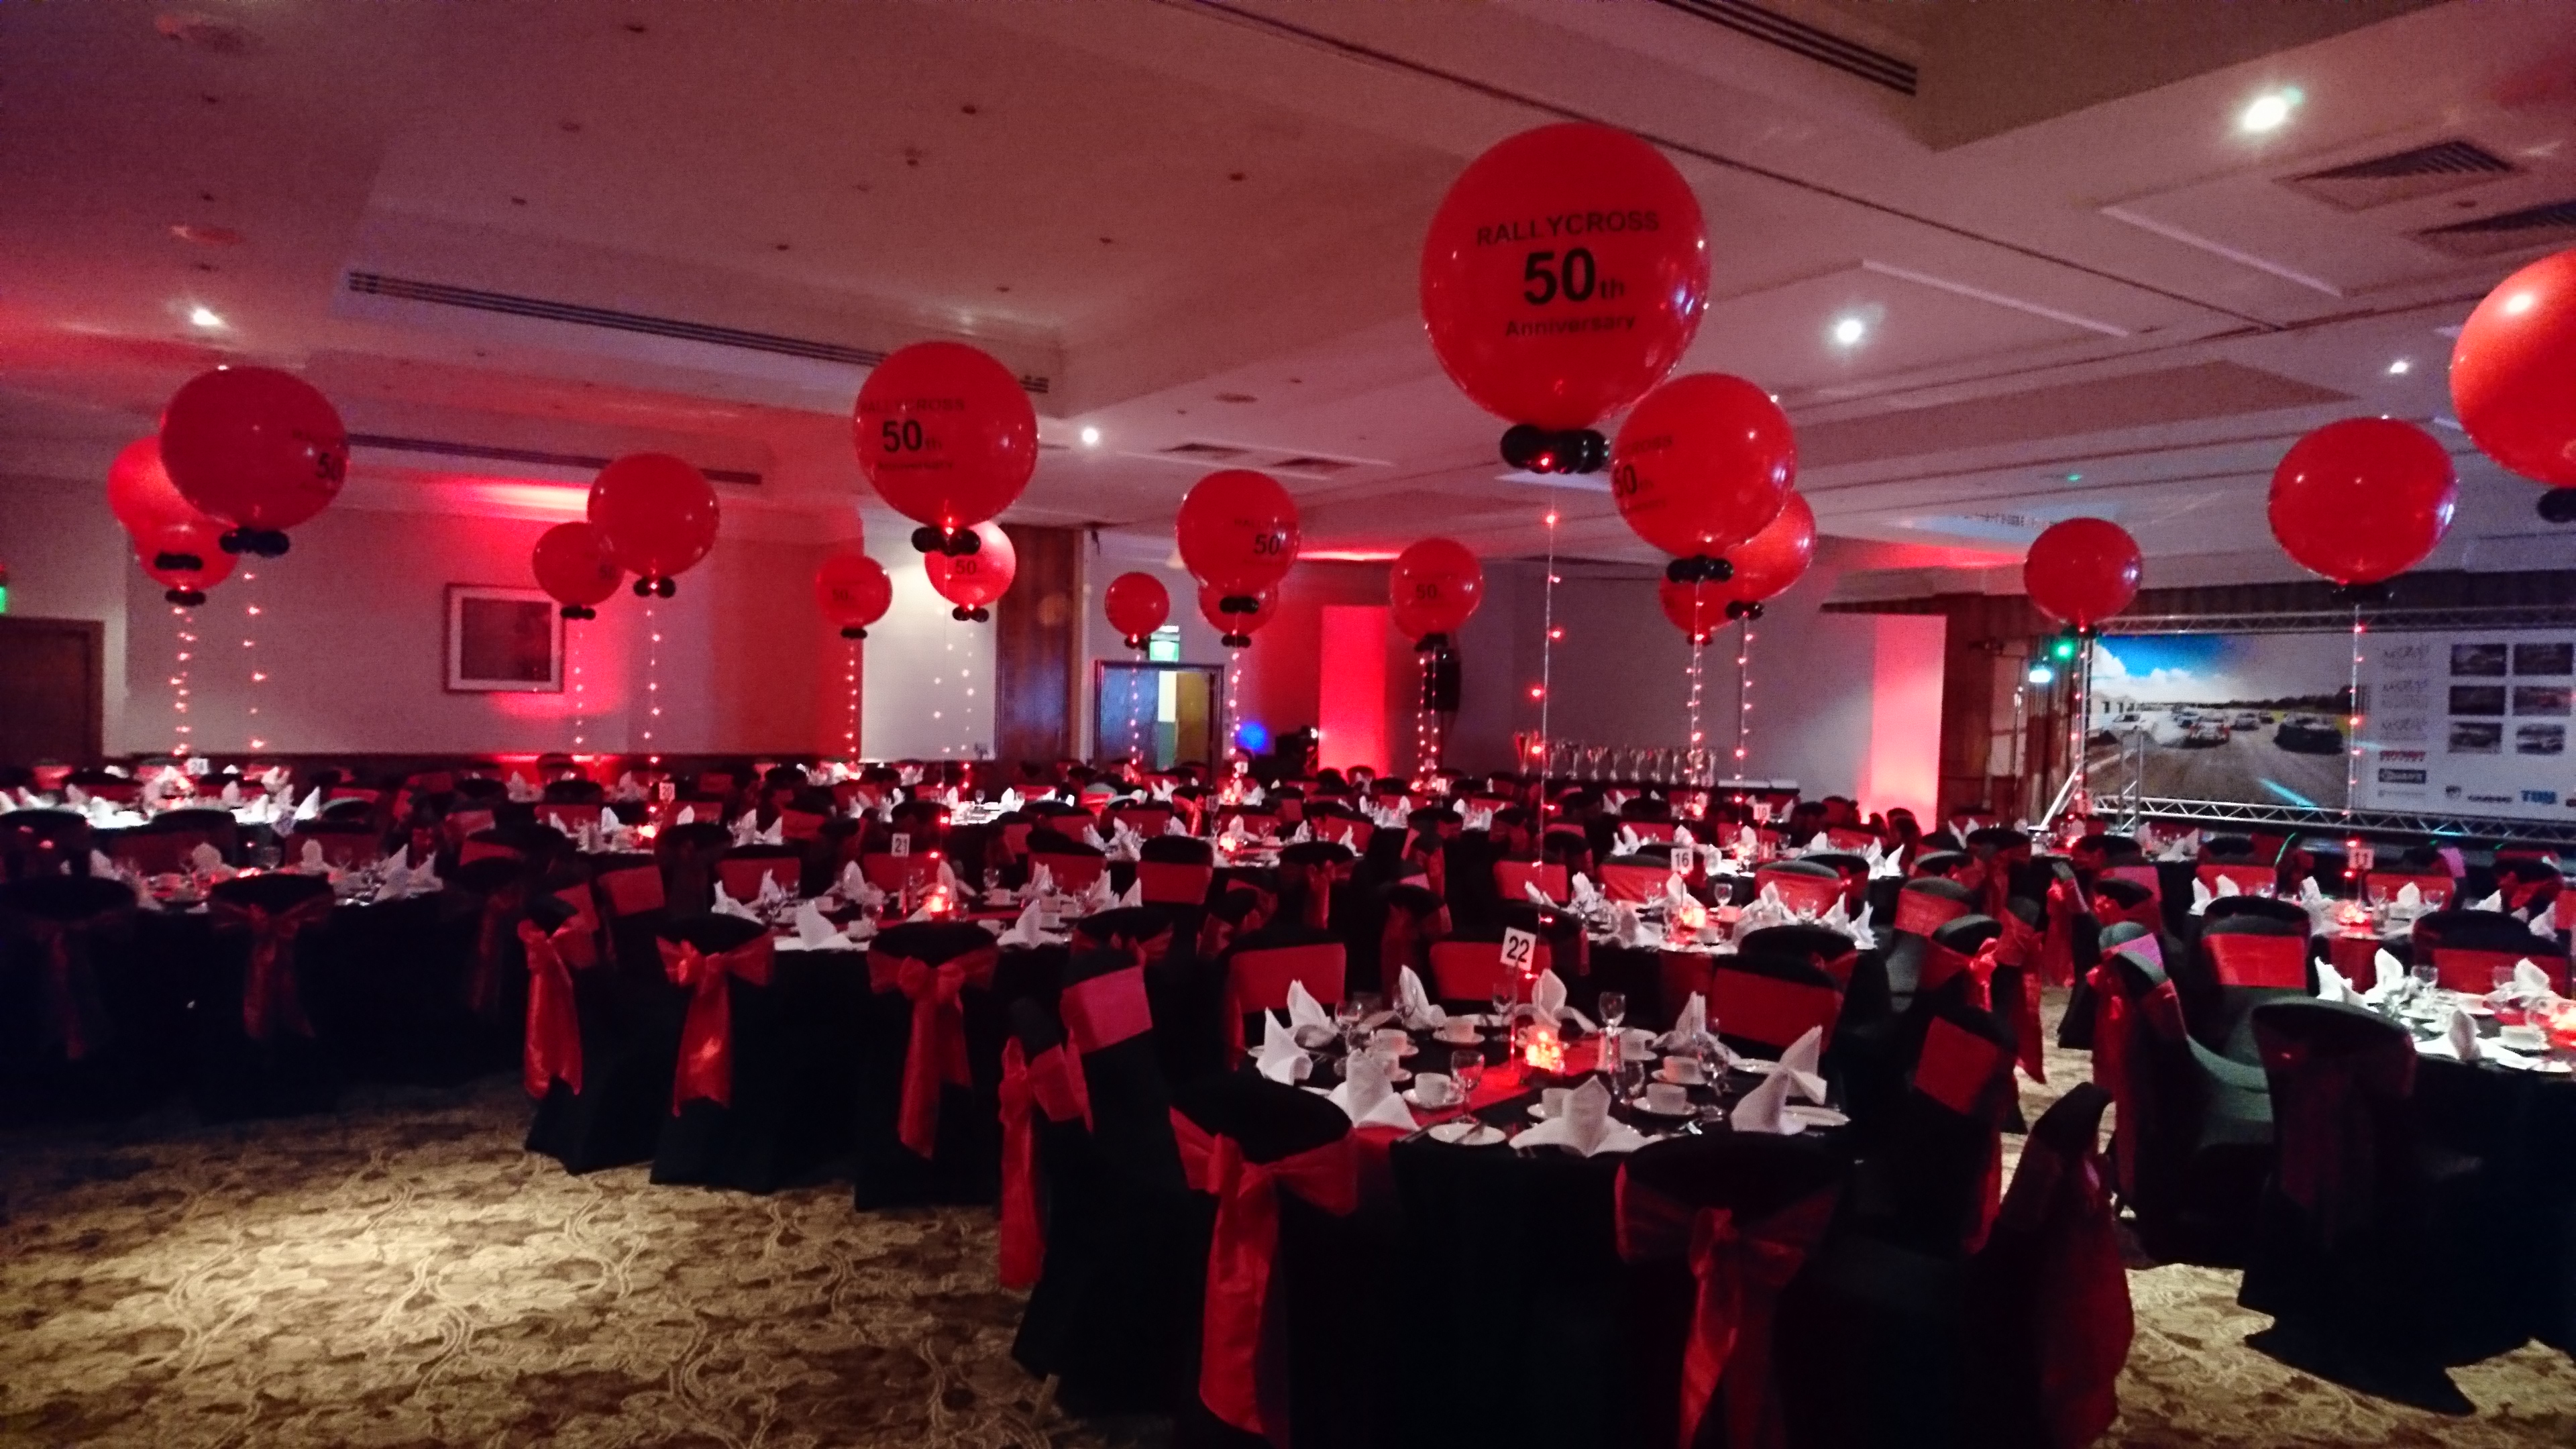 Read more about the article Championship at Double Tree Hilton Walsgrave. Large 3 foot Balloons with logos, led lights and weights